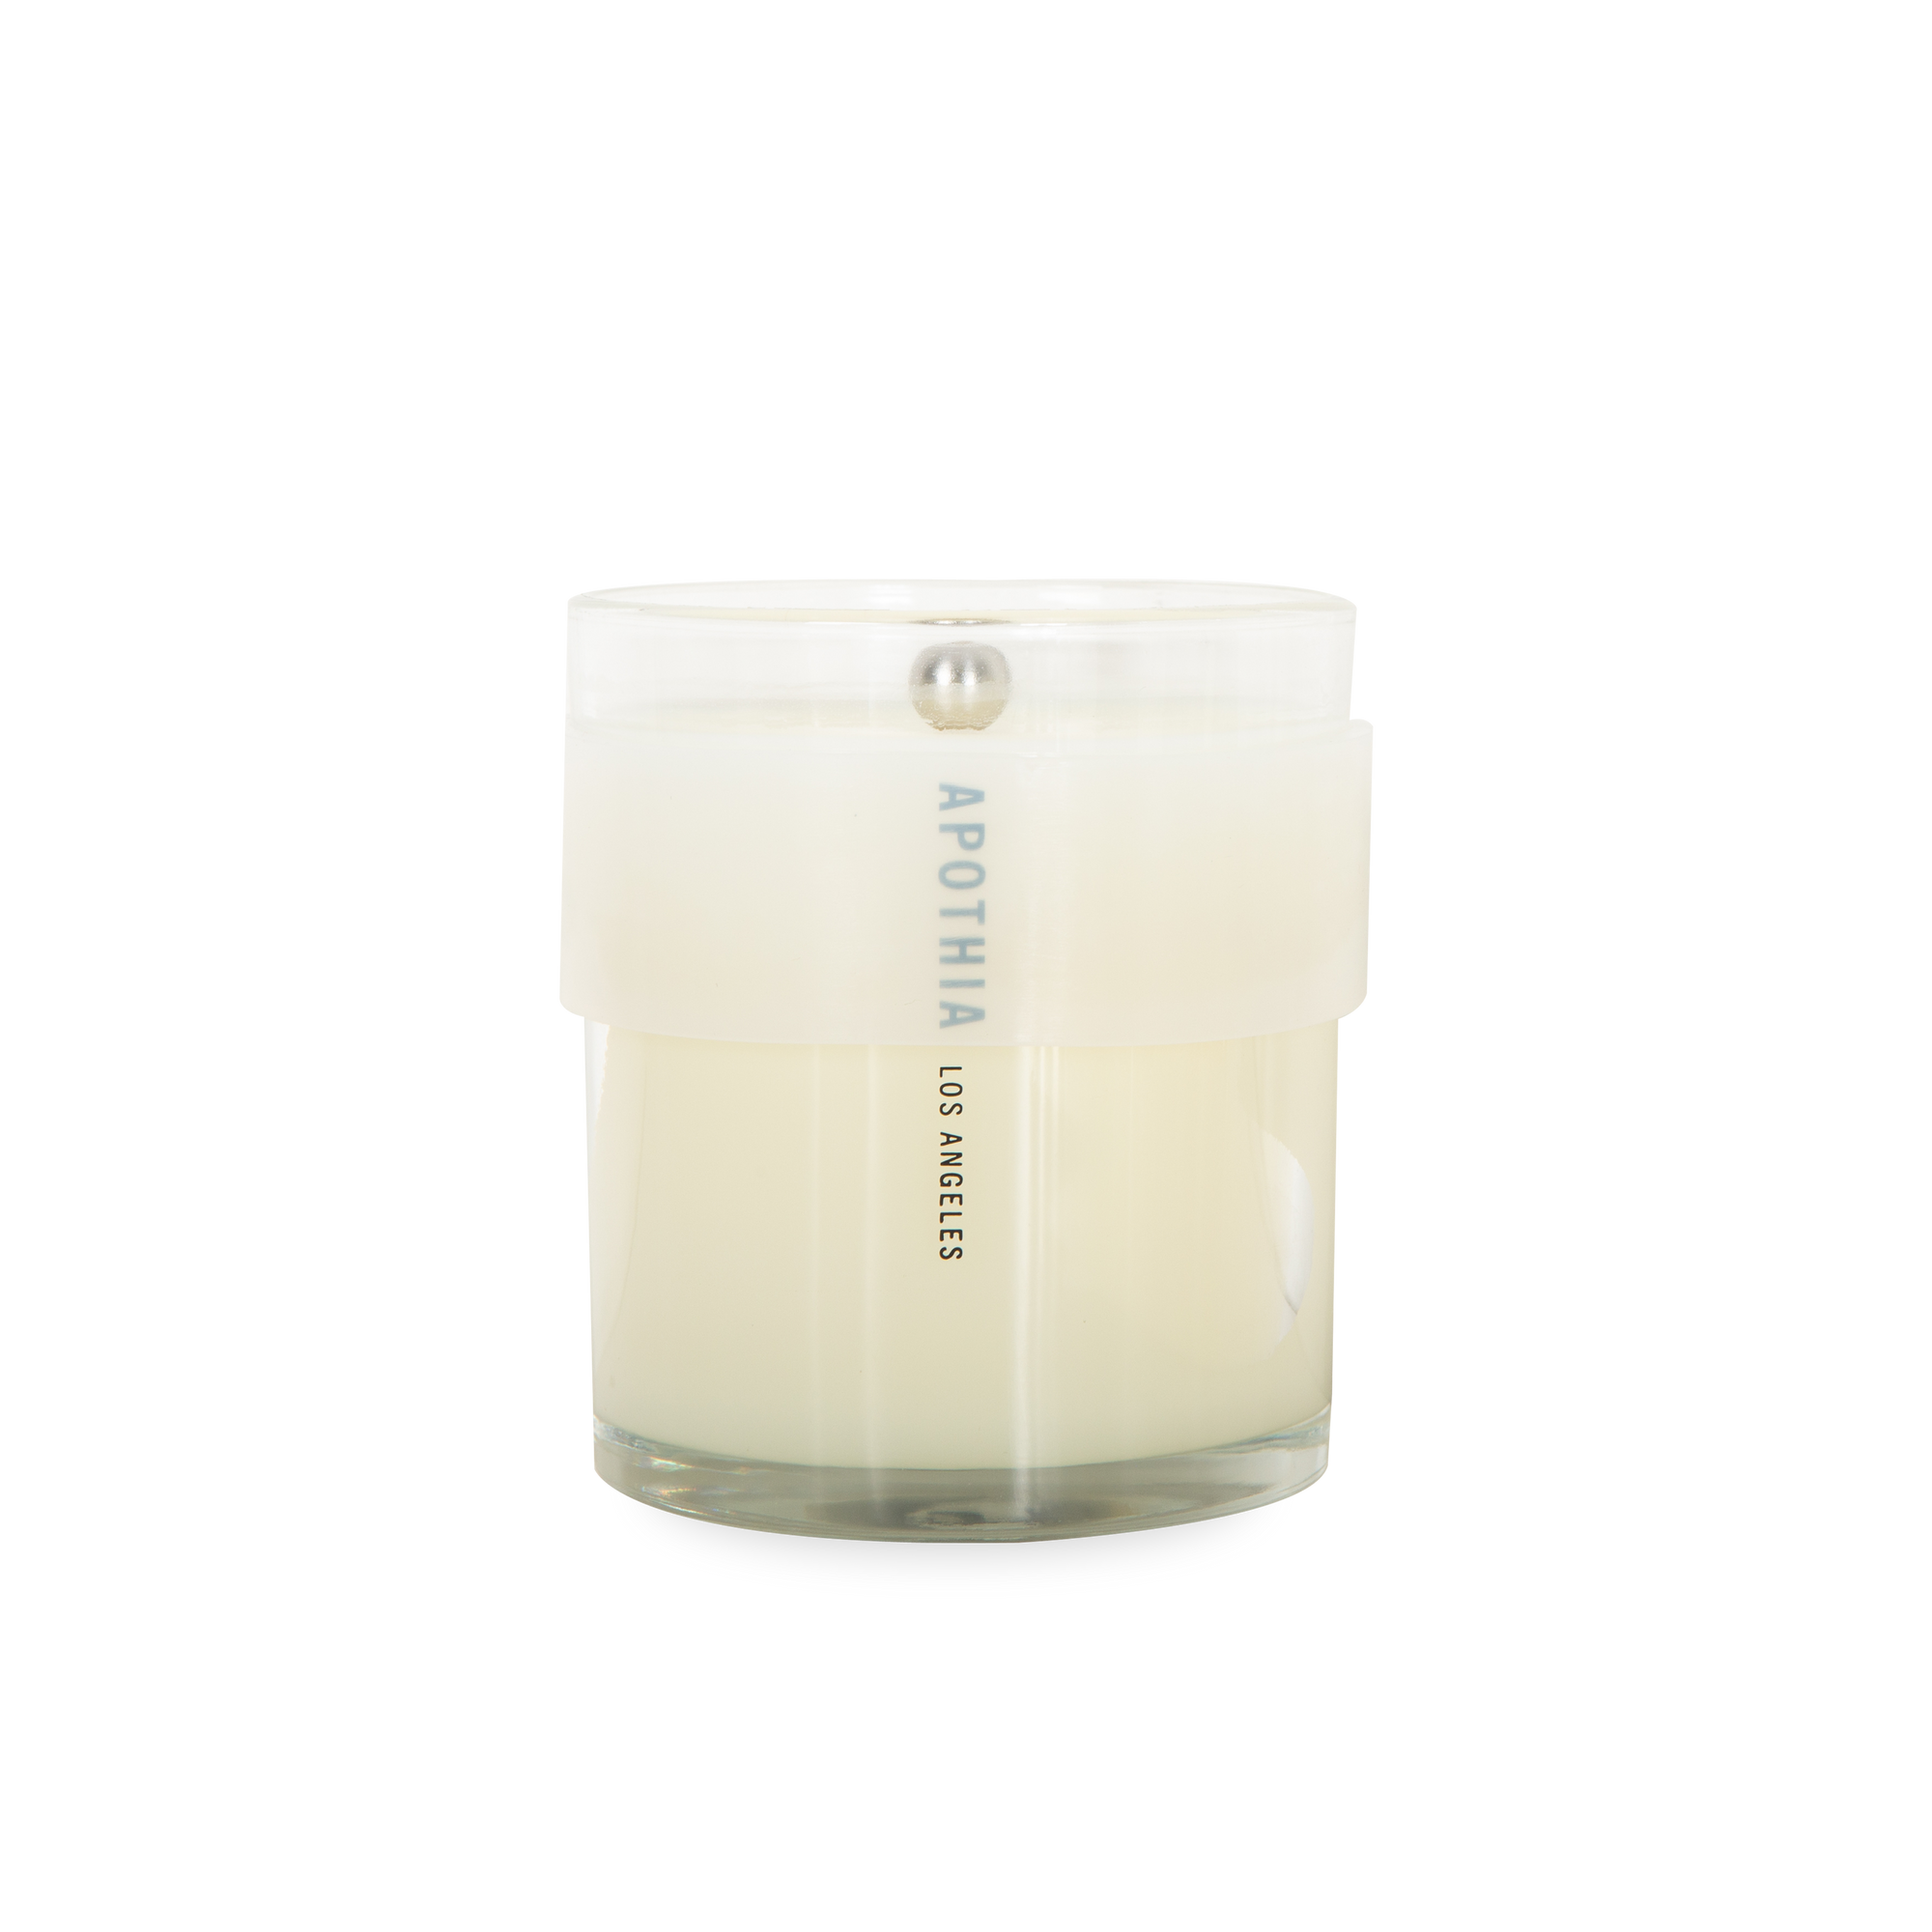 The IF Scented Candle is made with naturally derived ingredients and invigorating aromatherapy properties, this candle will fill your home with beautiful aromatics, helping reduce 